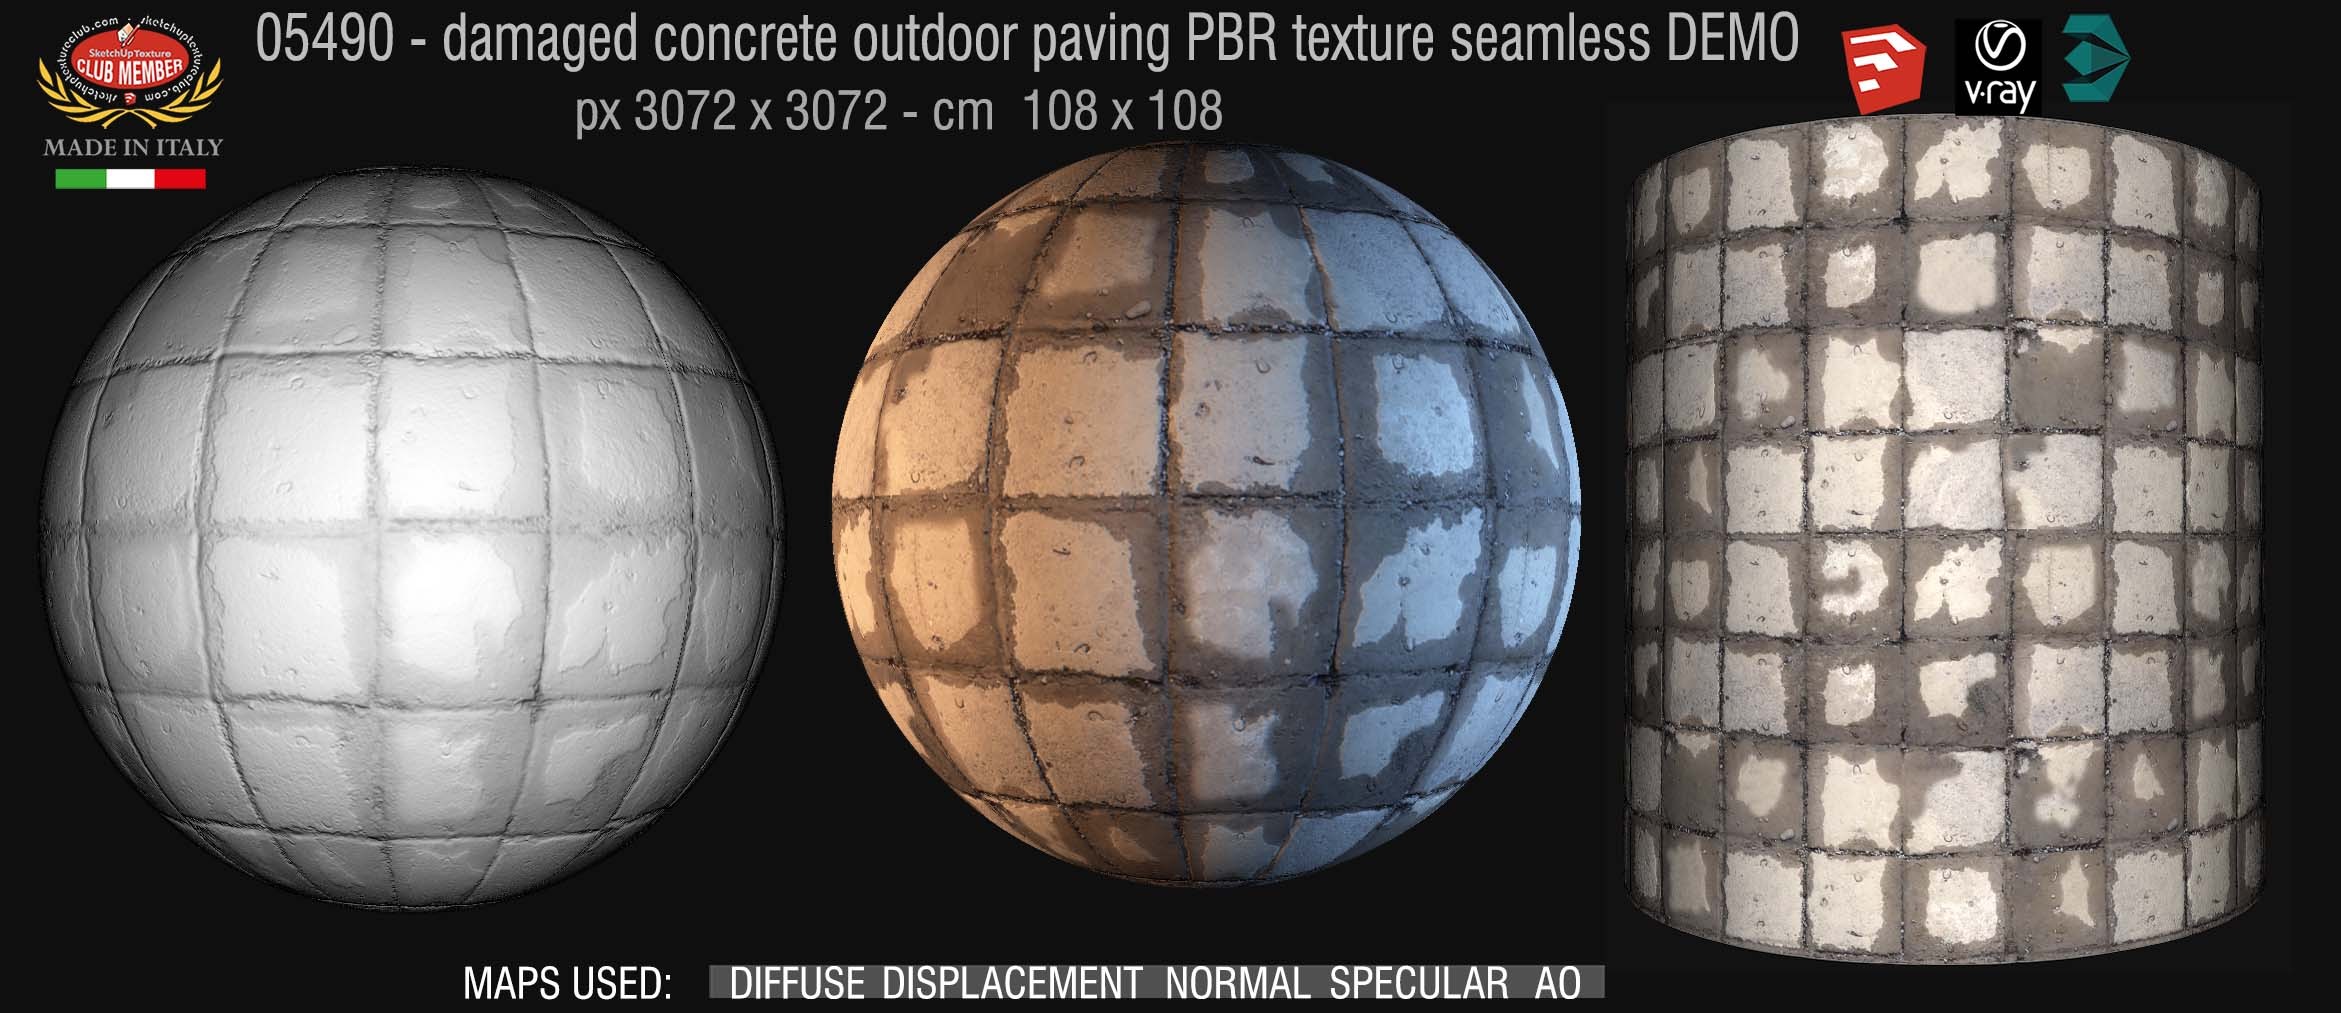 05490 Damaged concrete outdoor paving PBR texture seamless DEMO